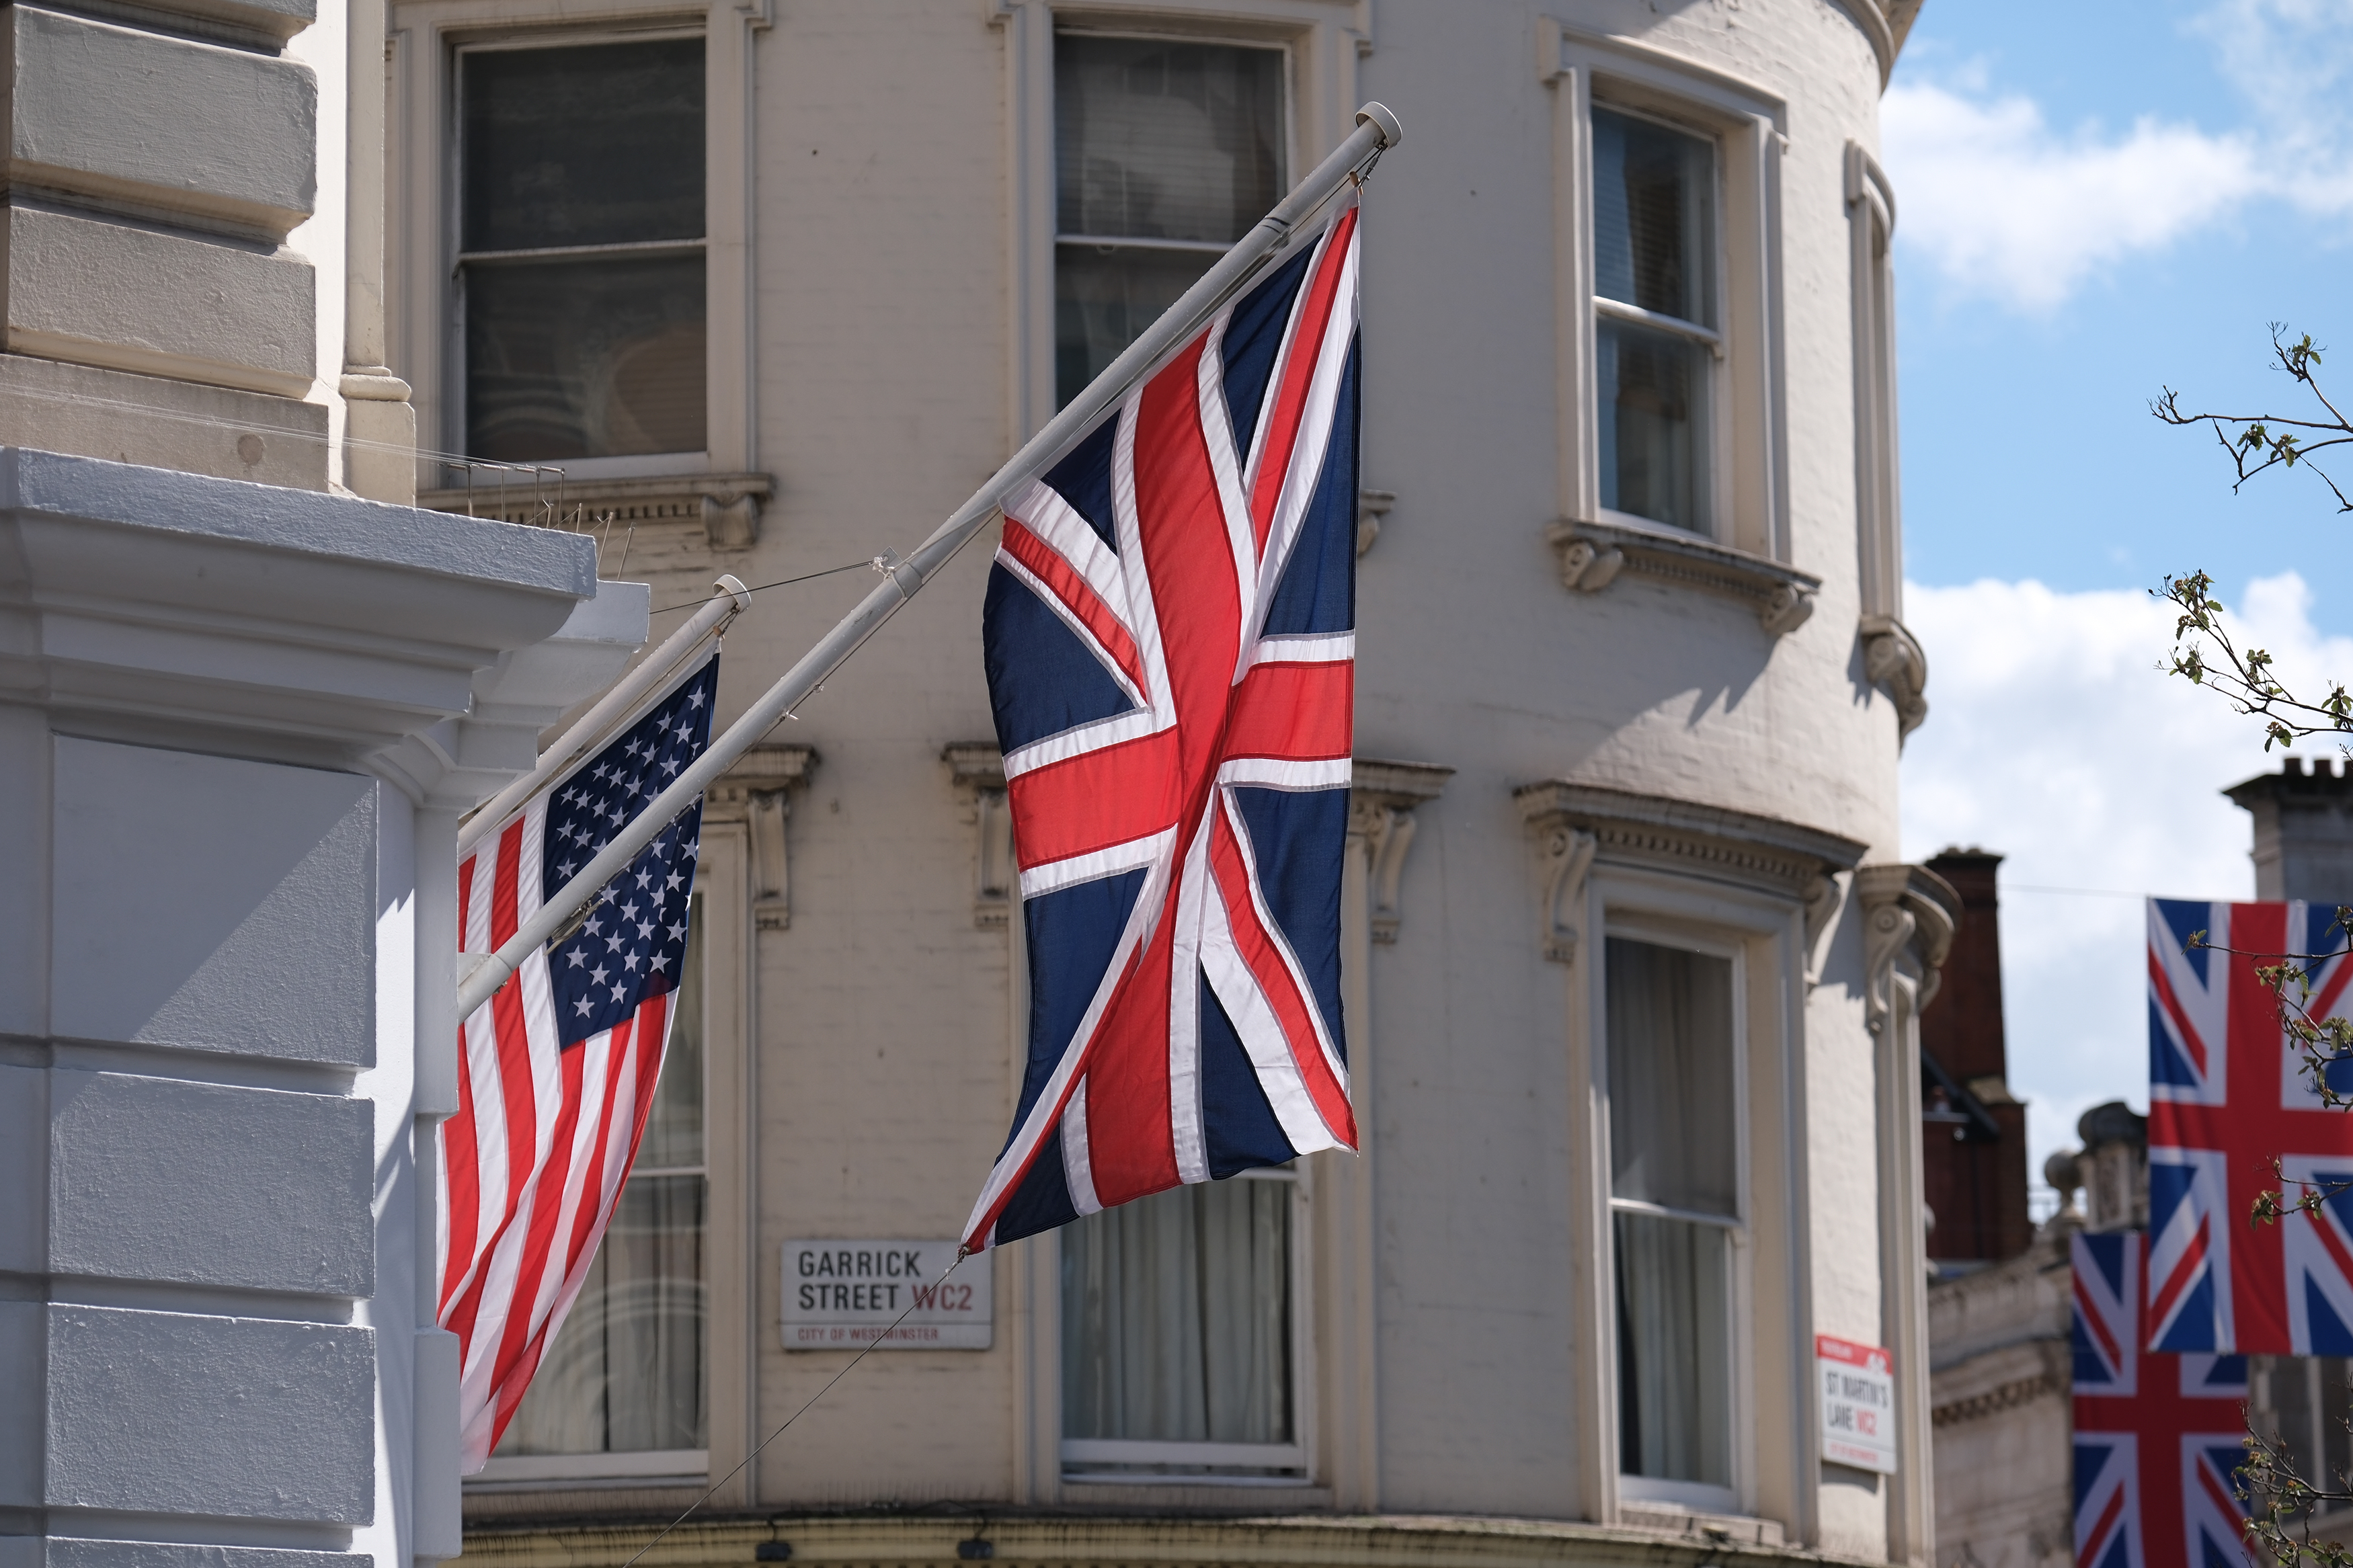 A union jack flag hanging from a building